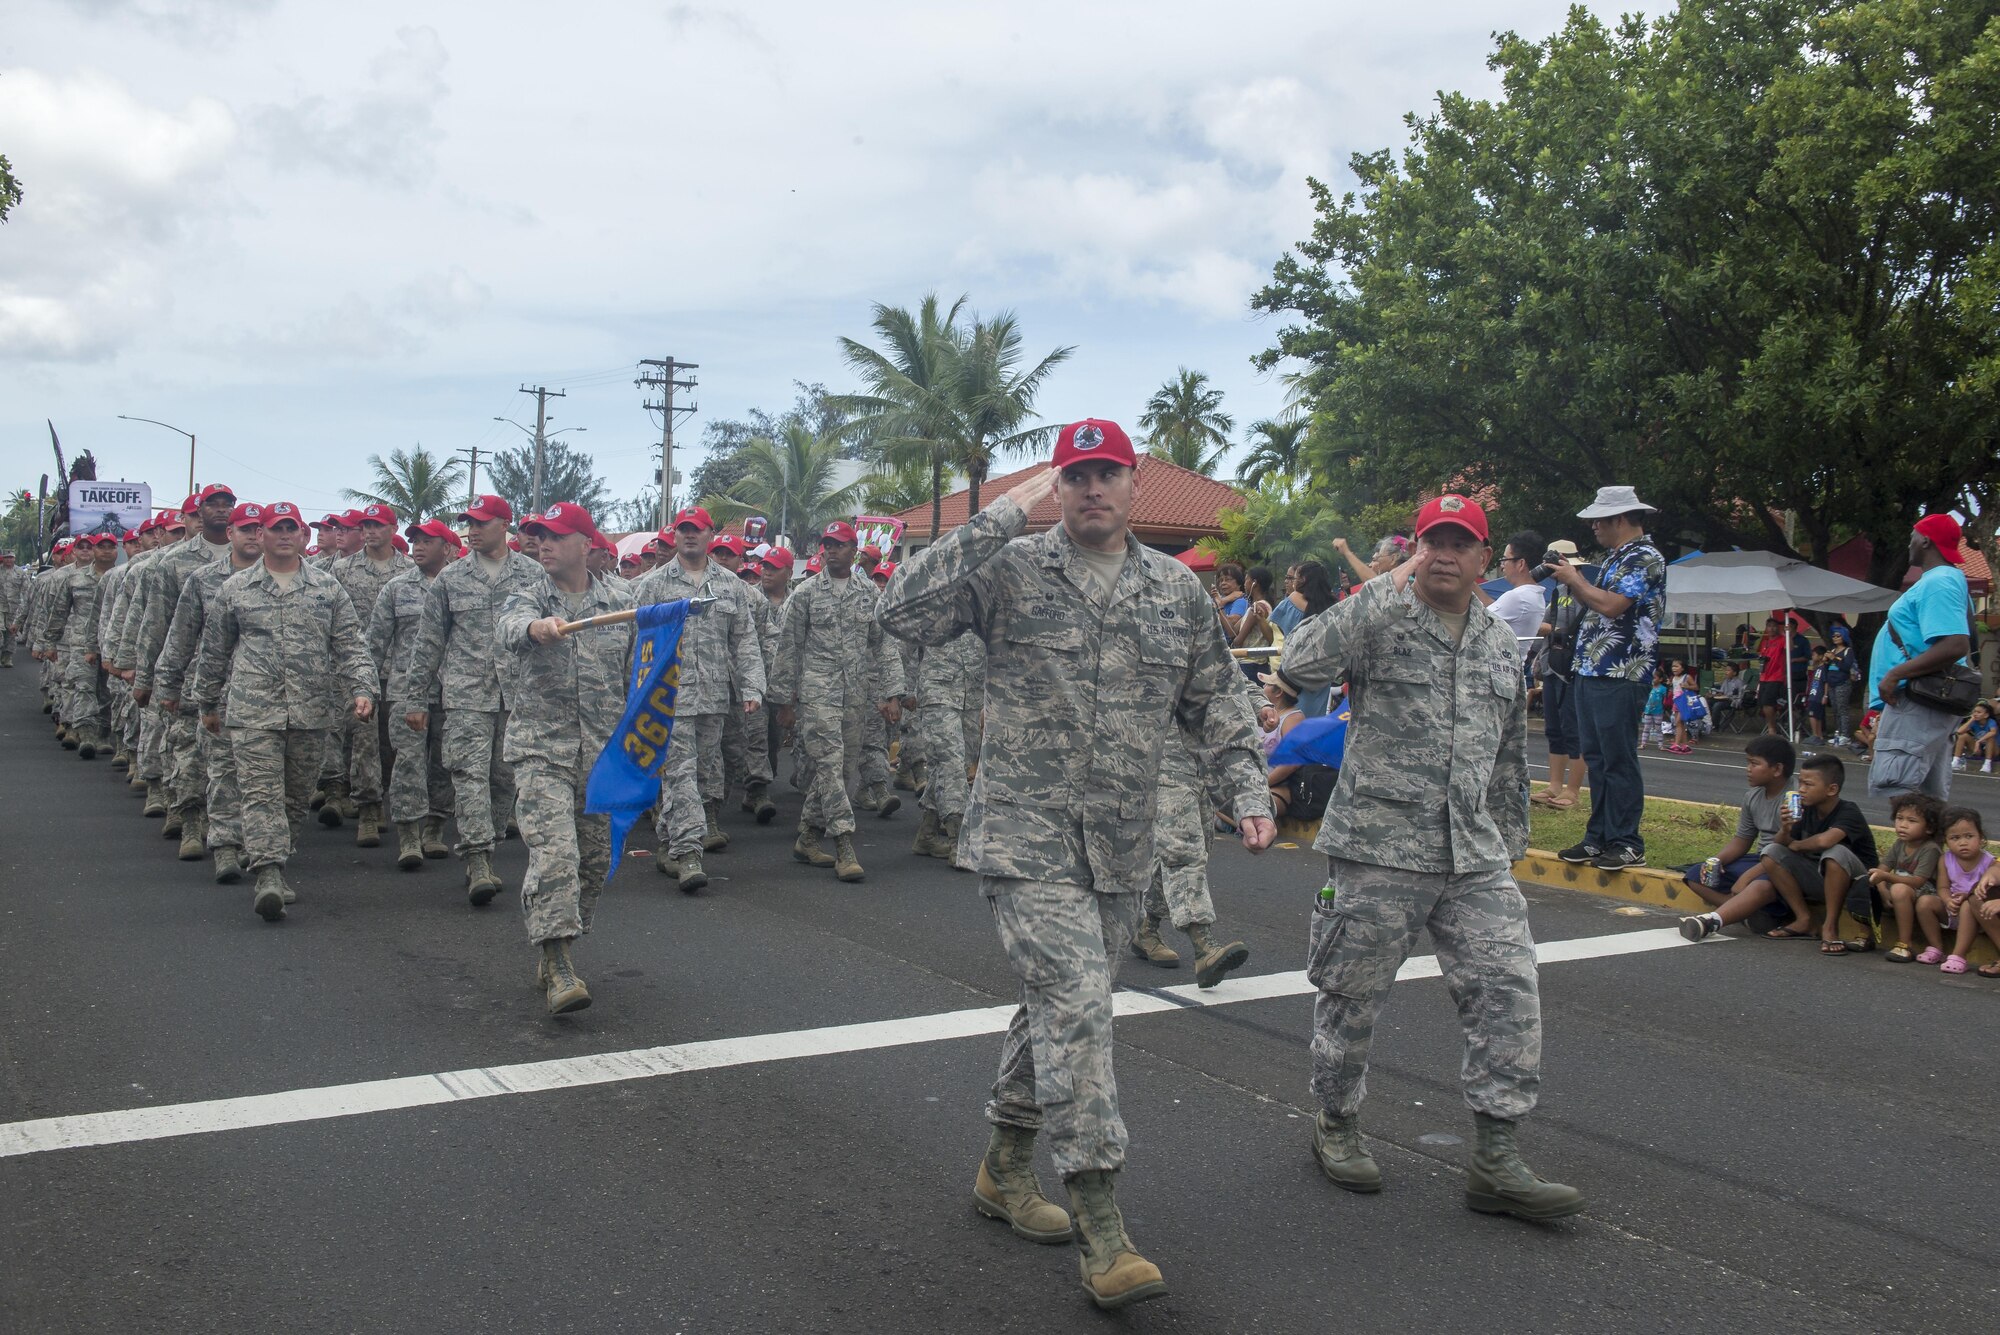 U.S. Airmen with the 554th RED HORSE Squadron, march in the 73rd Guam Liberation Day parade July 21, 2016, in Hagåtña, Guam. The parade commemorated 73 years since U.S. armed forces liberated the island from Japanese occupation. During World War II, Japan seized Guam on December 10, 1941, and on July 21, 1944, the U.S. armed forces liberated the island. (U.S. Air Force photo by Airman 1st Class Christopher Quail)